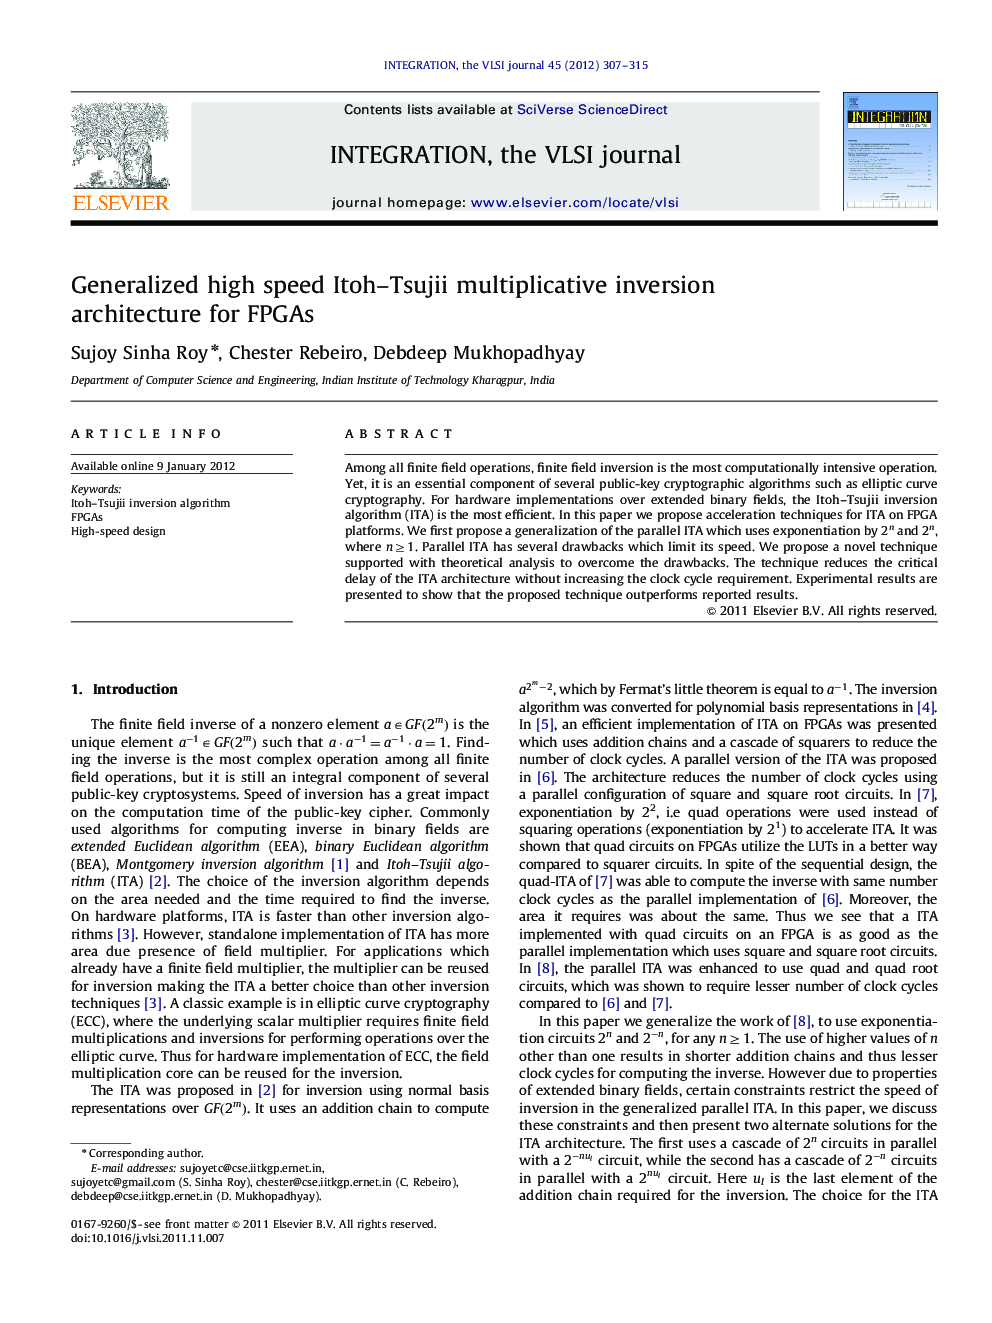 Generalized high speed Itoh–Tsujii multiplicative inversion architecture for FPGAs